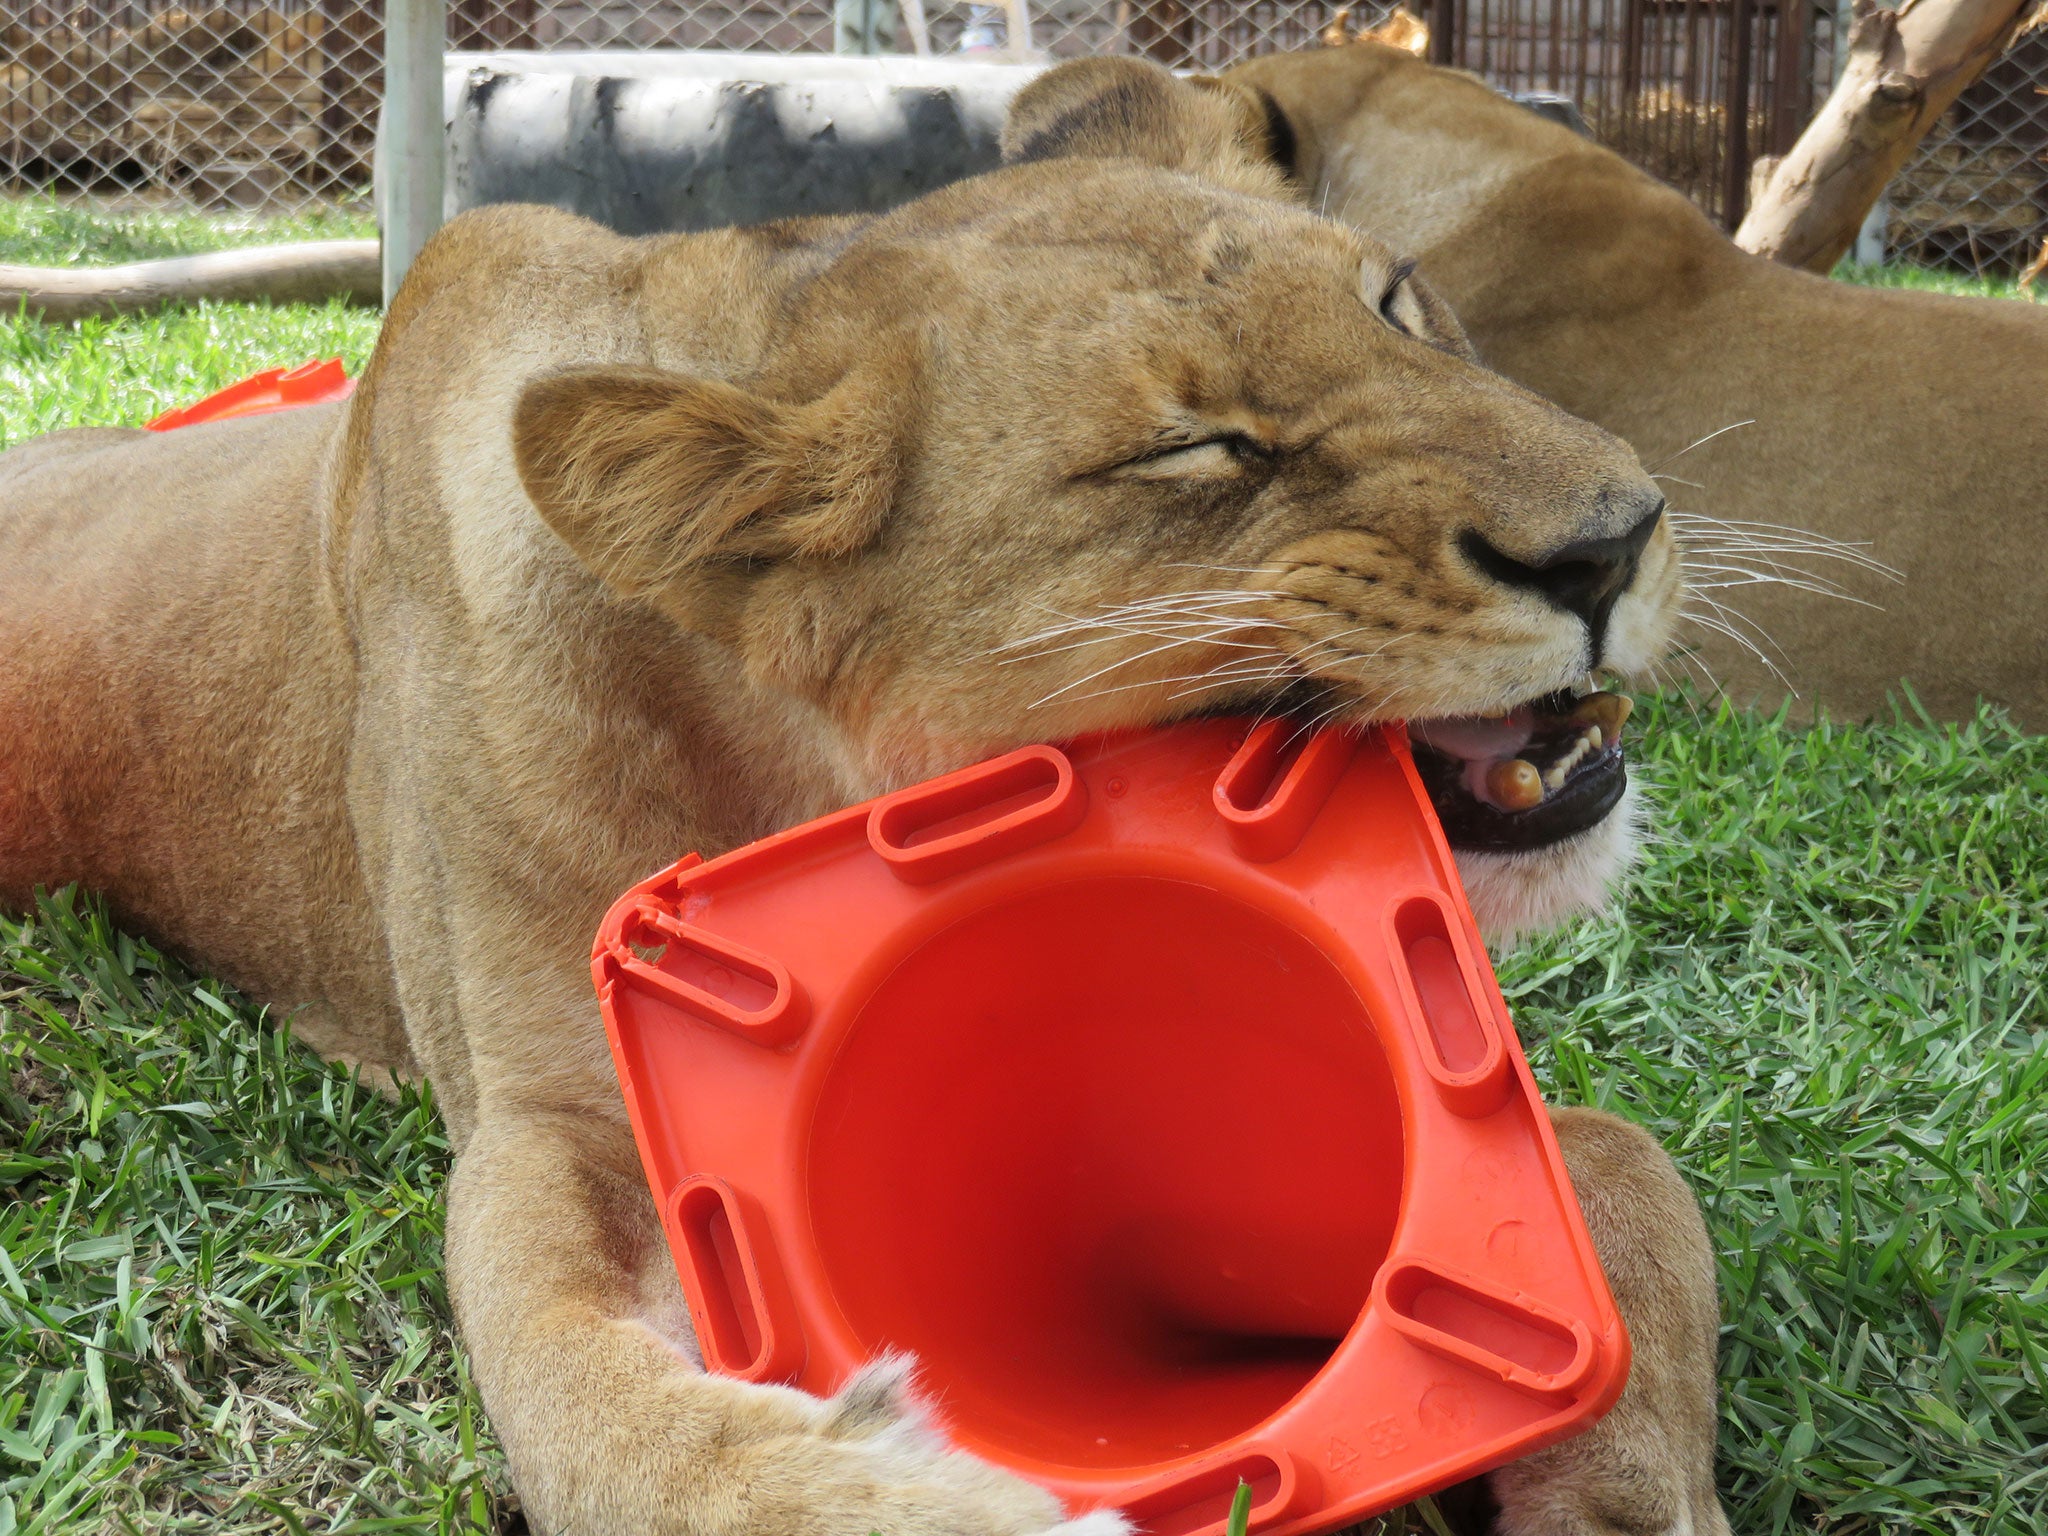 The 24 rescued lions are being microchipped at the Emoya Big Cat Sanctuary in Limpopo province